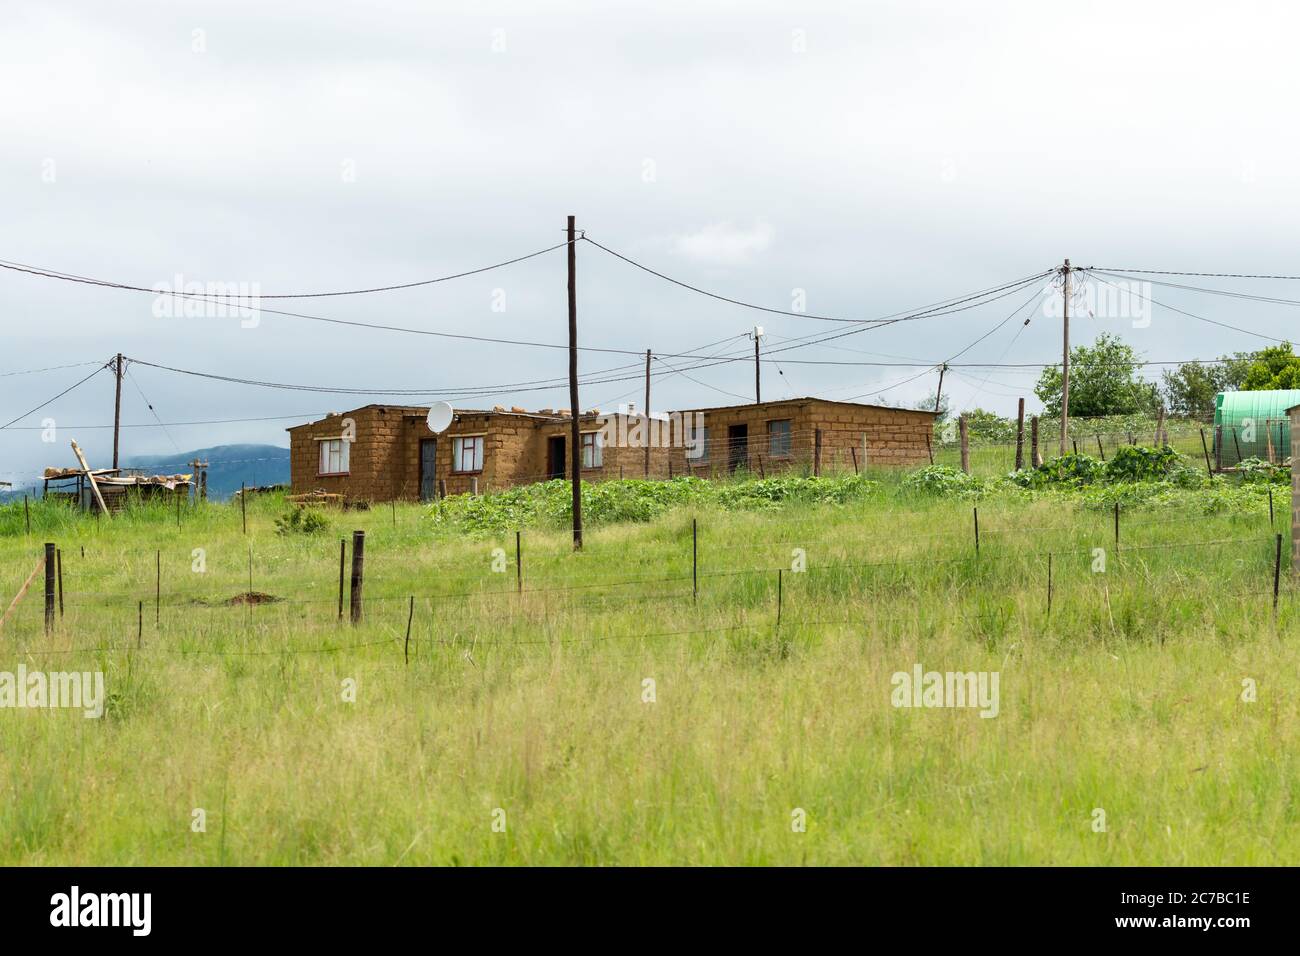 low cost budget house in rural South Africa Stock Photo